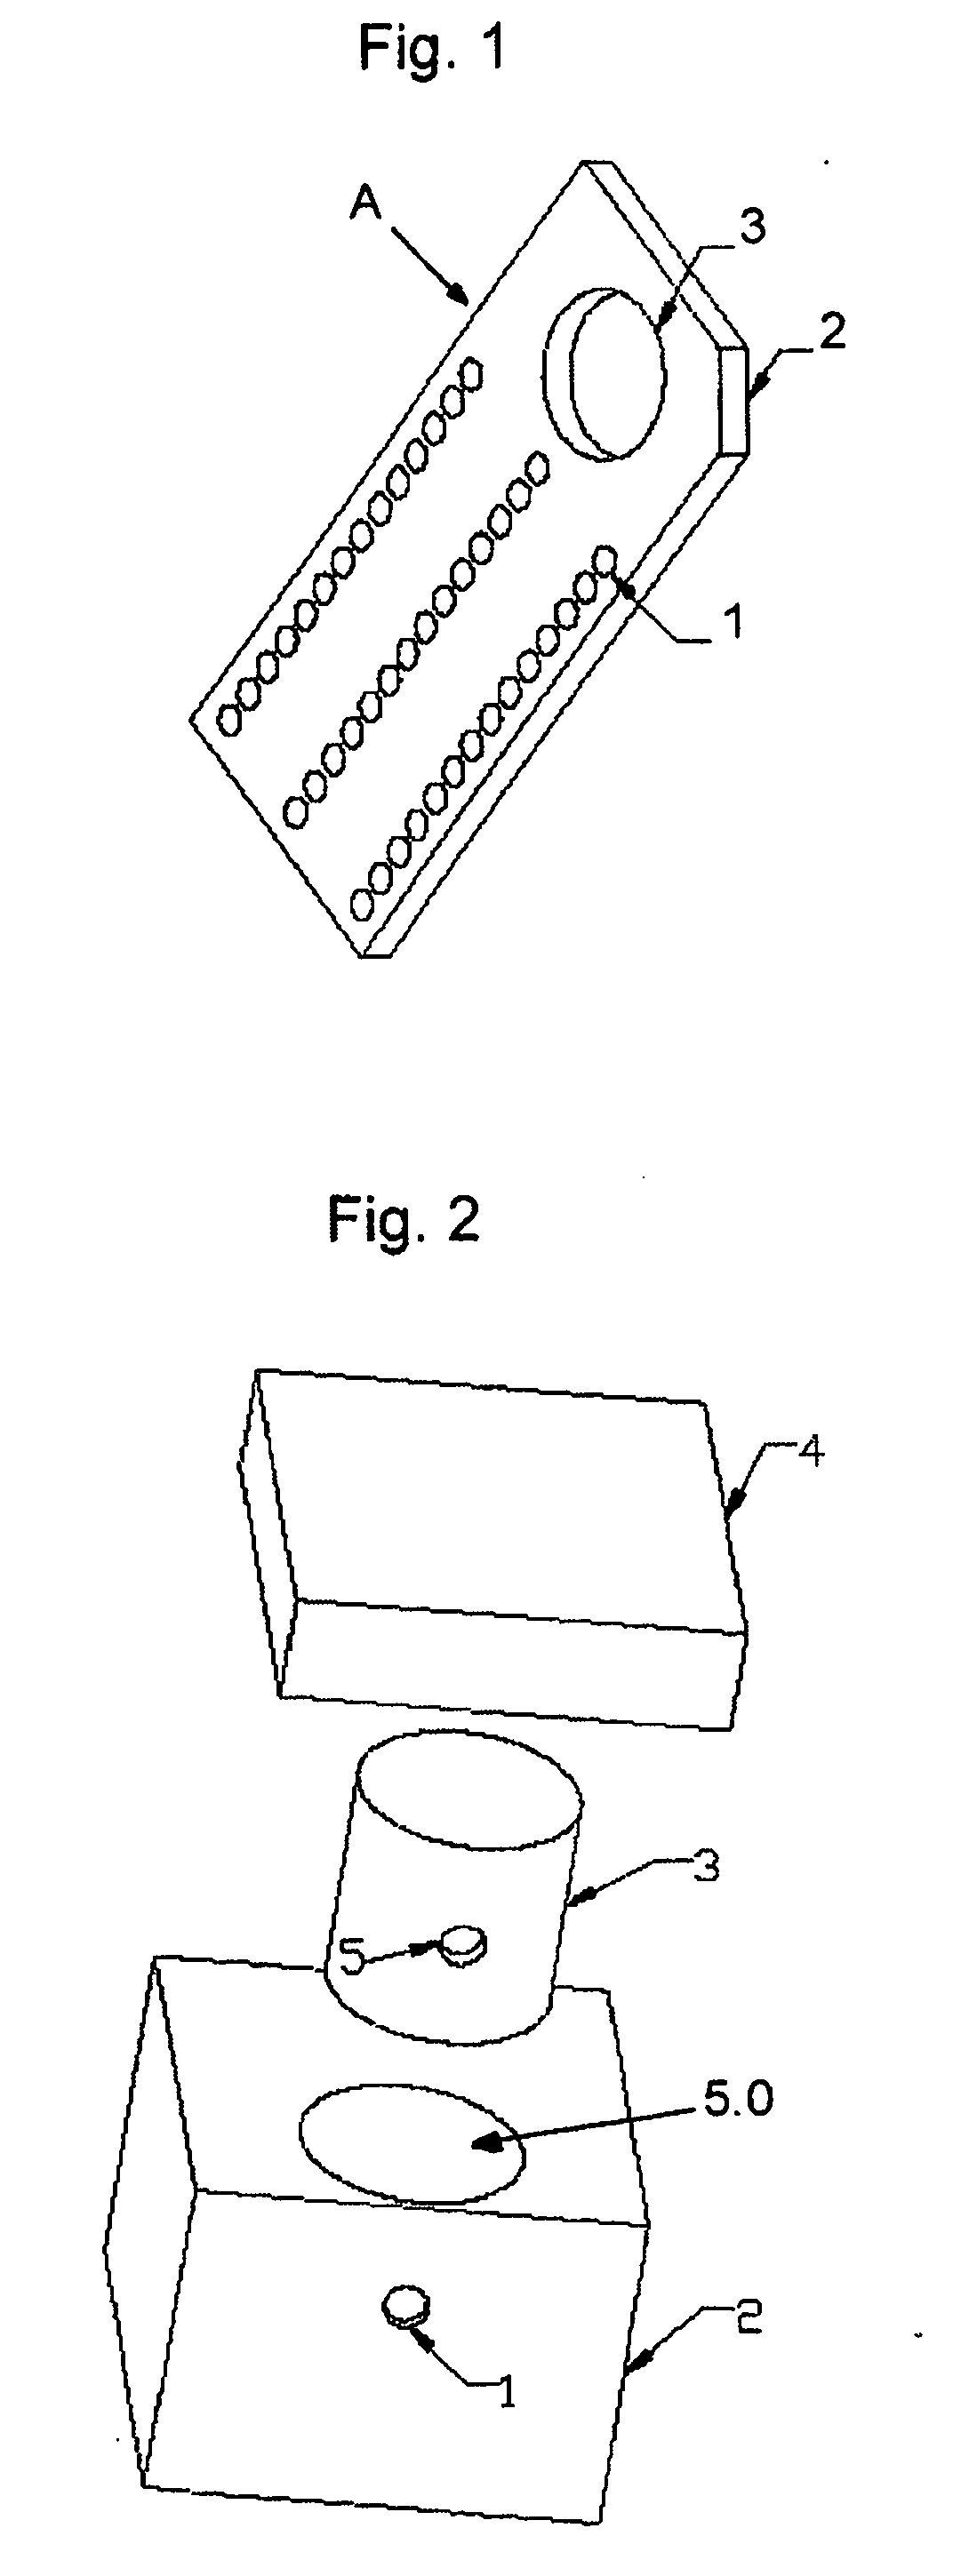 Process and equipment for the measurement of ionizing radiation doses in patients